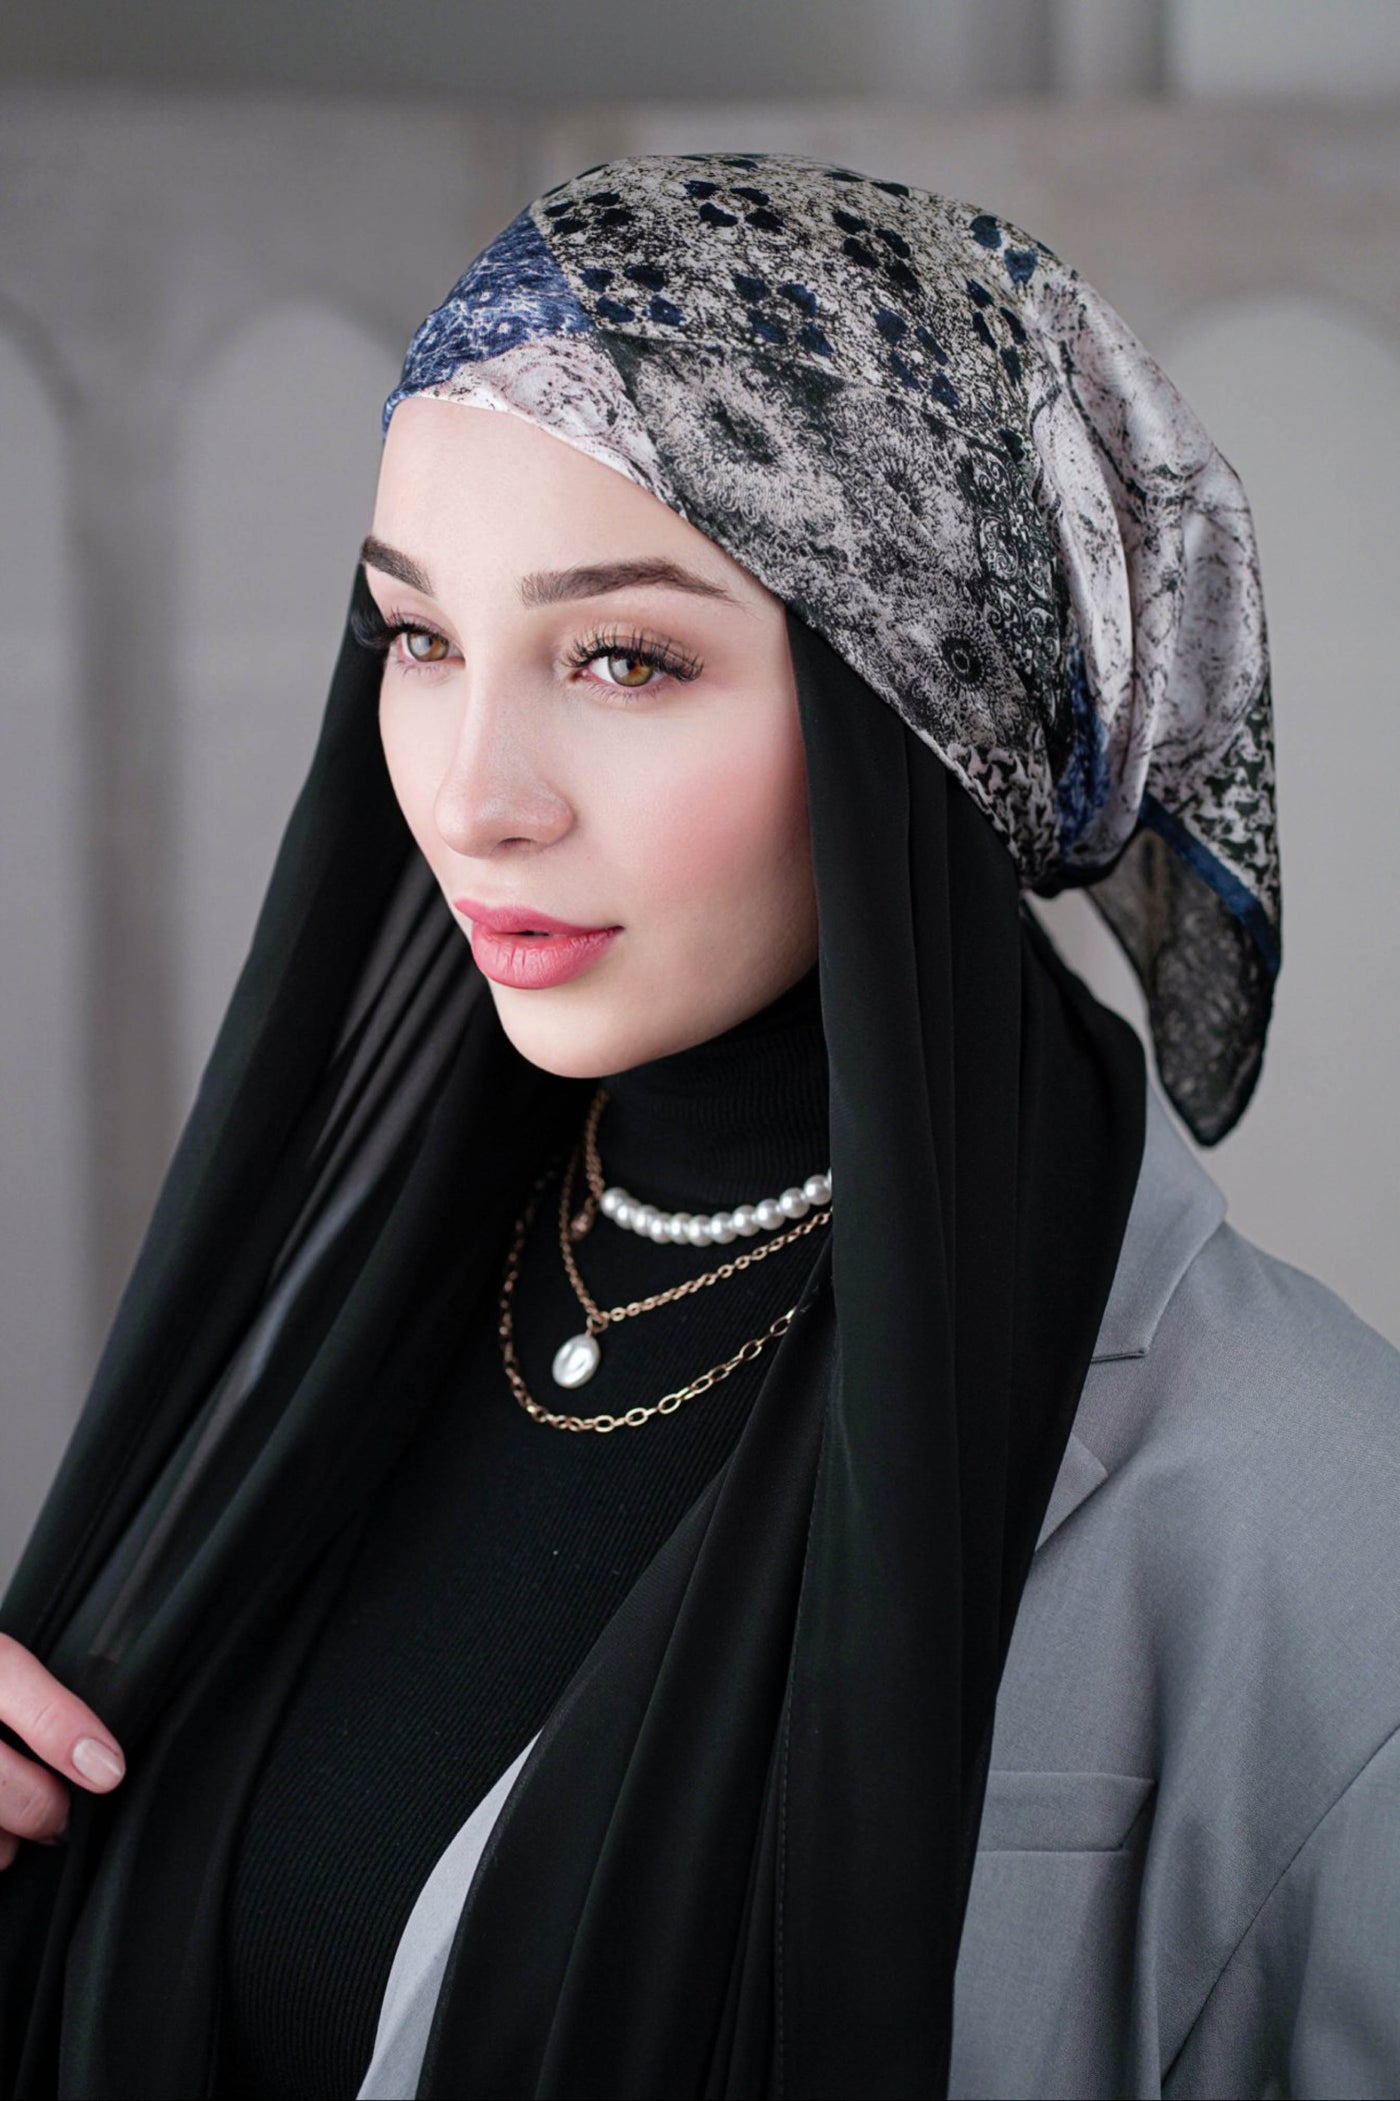 Instant Chiffon Hijab with full-coverage underscarf - black